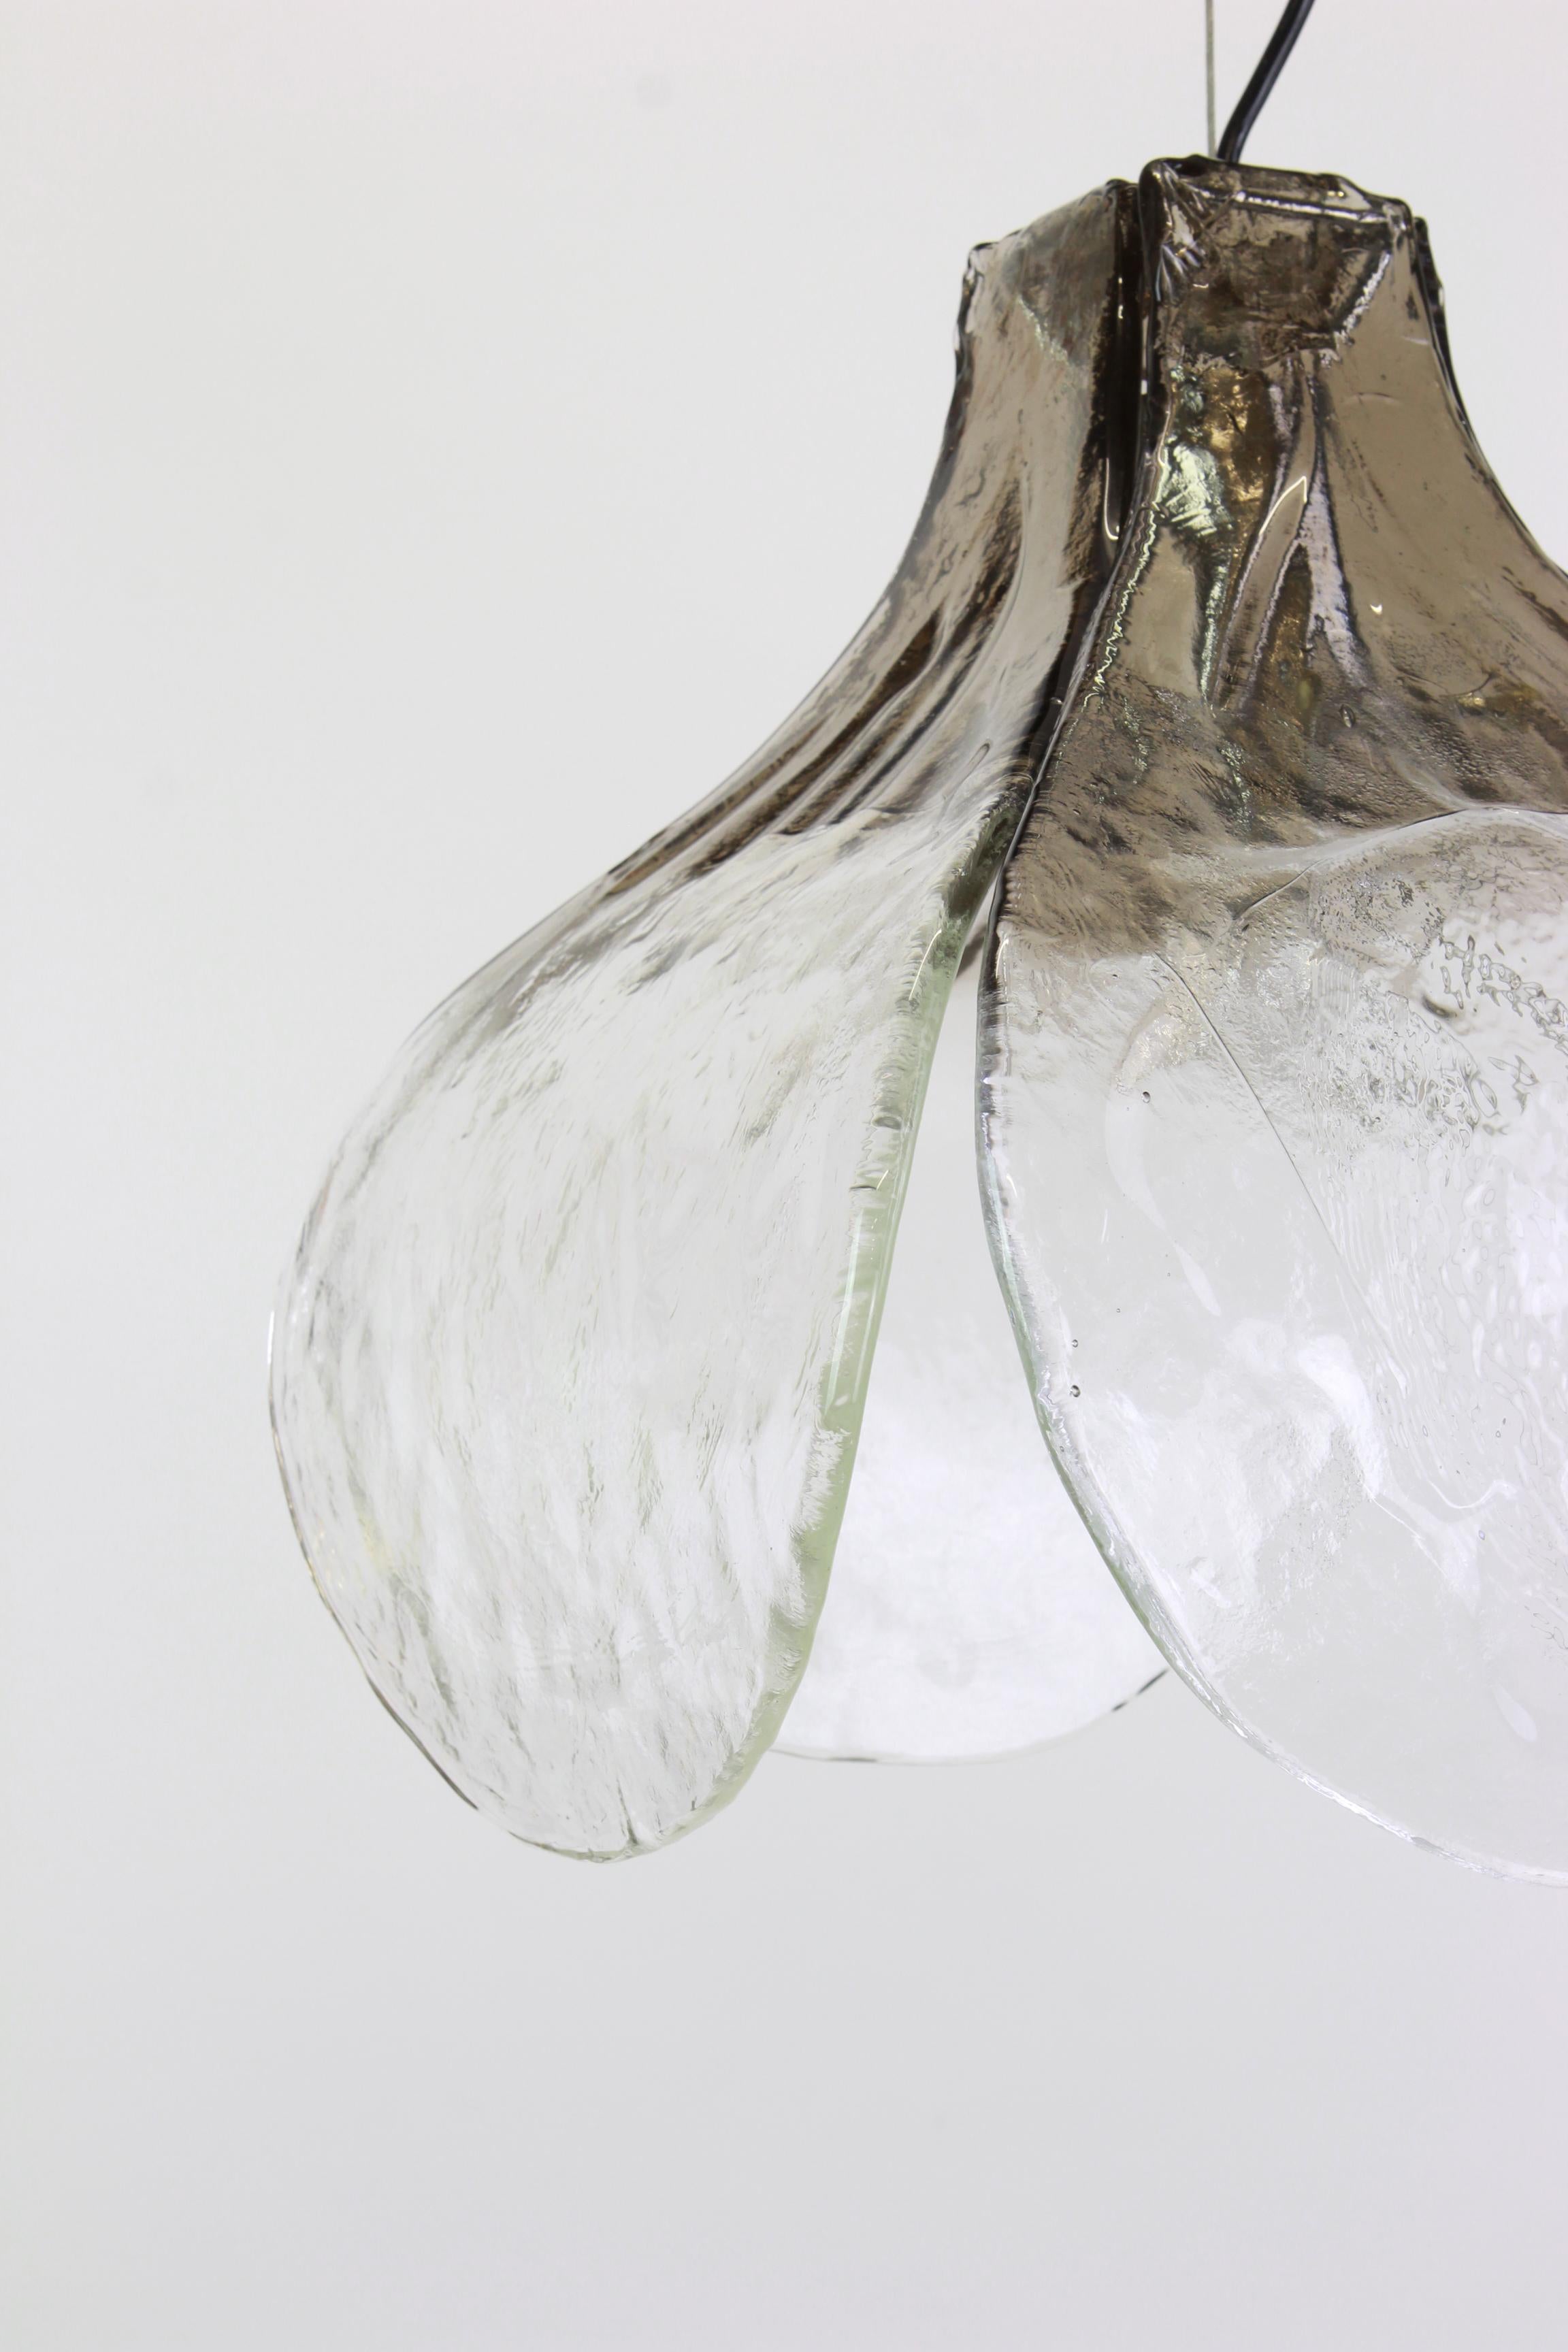 Murano pendant light designed by Carlo Nason for Mazzega, 1970s

A wonderful floral pendant light with four large handblown clear and smoked Murano glass petals which are supported by a metal frame, designed by Carlo Nason for Mazzega,